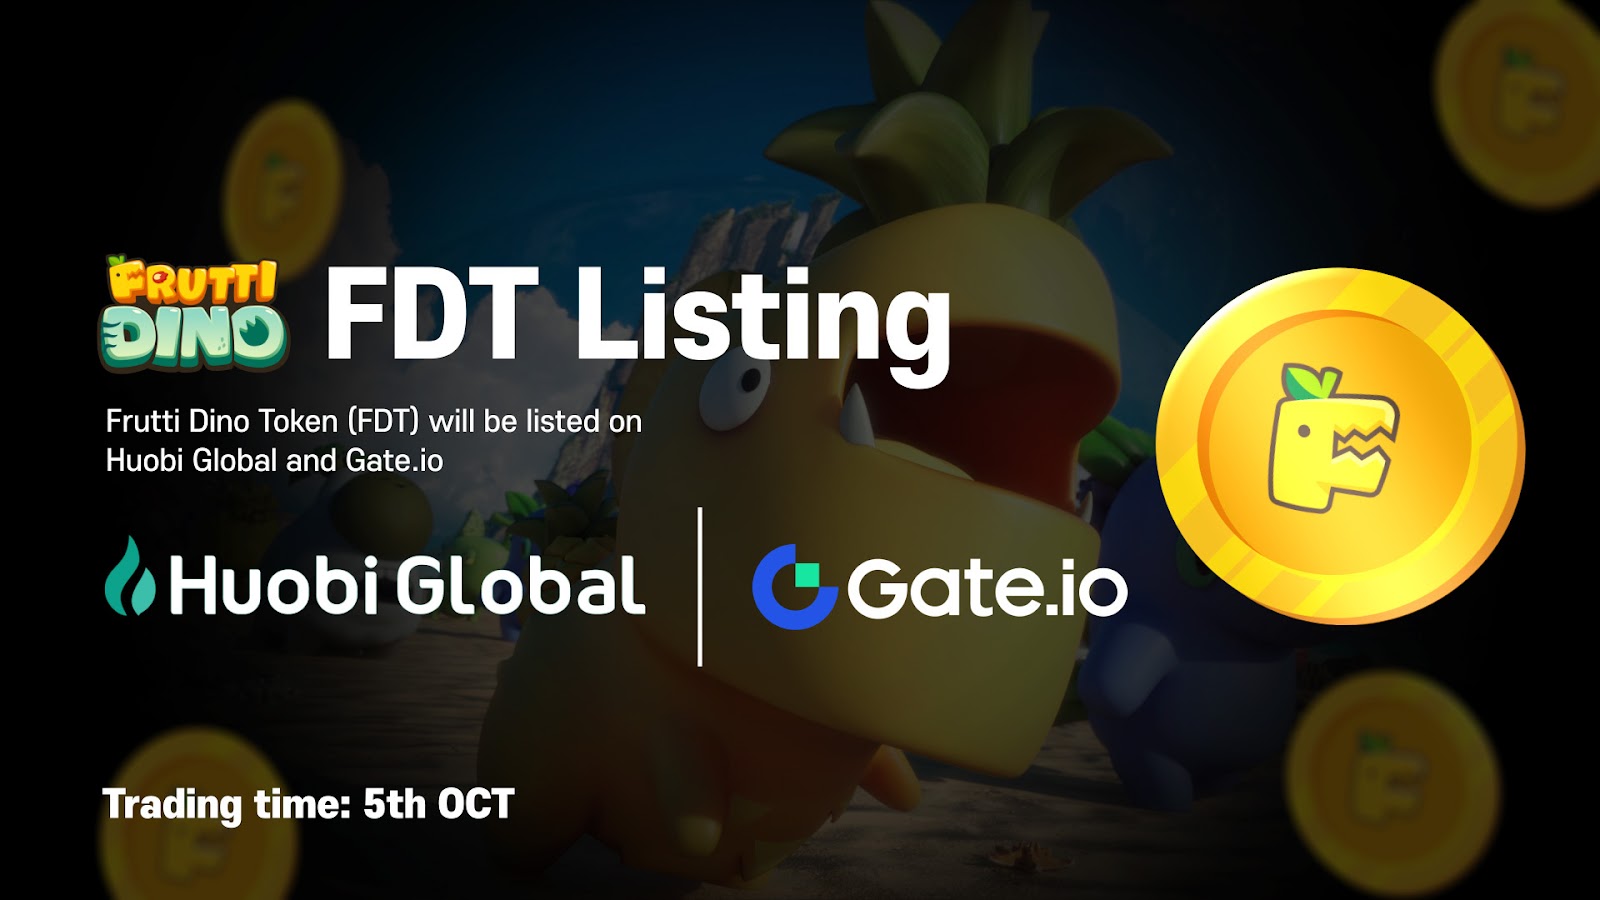 Frutti Dino’s FDT Token to Be Listed on Huobi Global and Gate․io